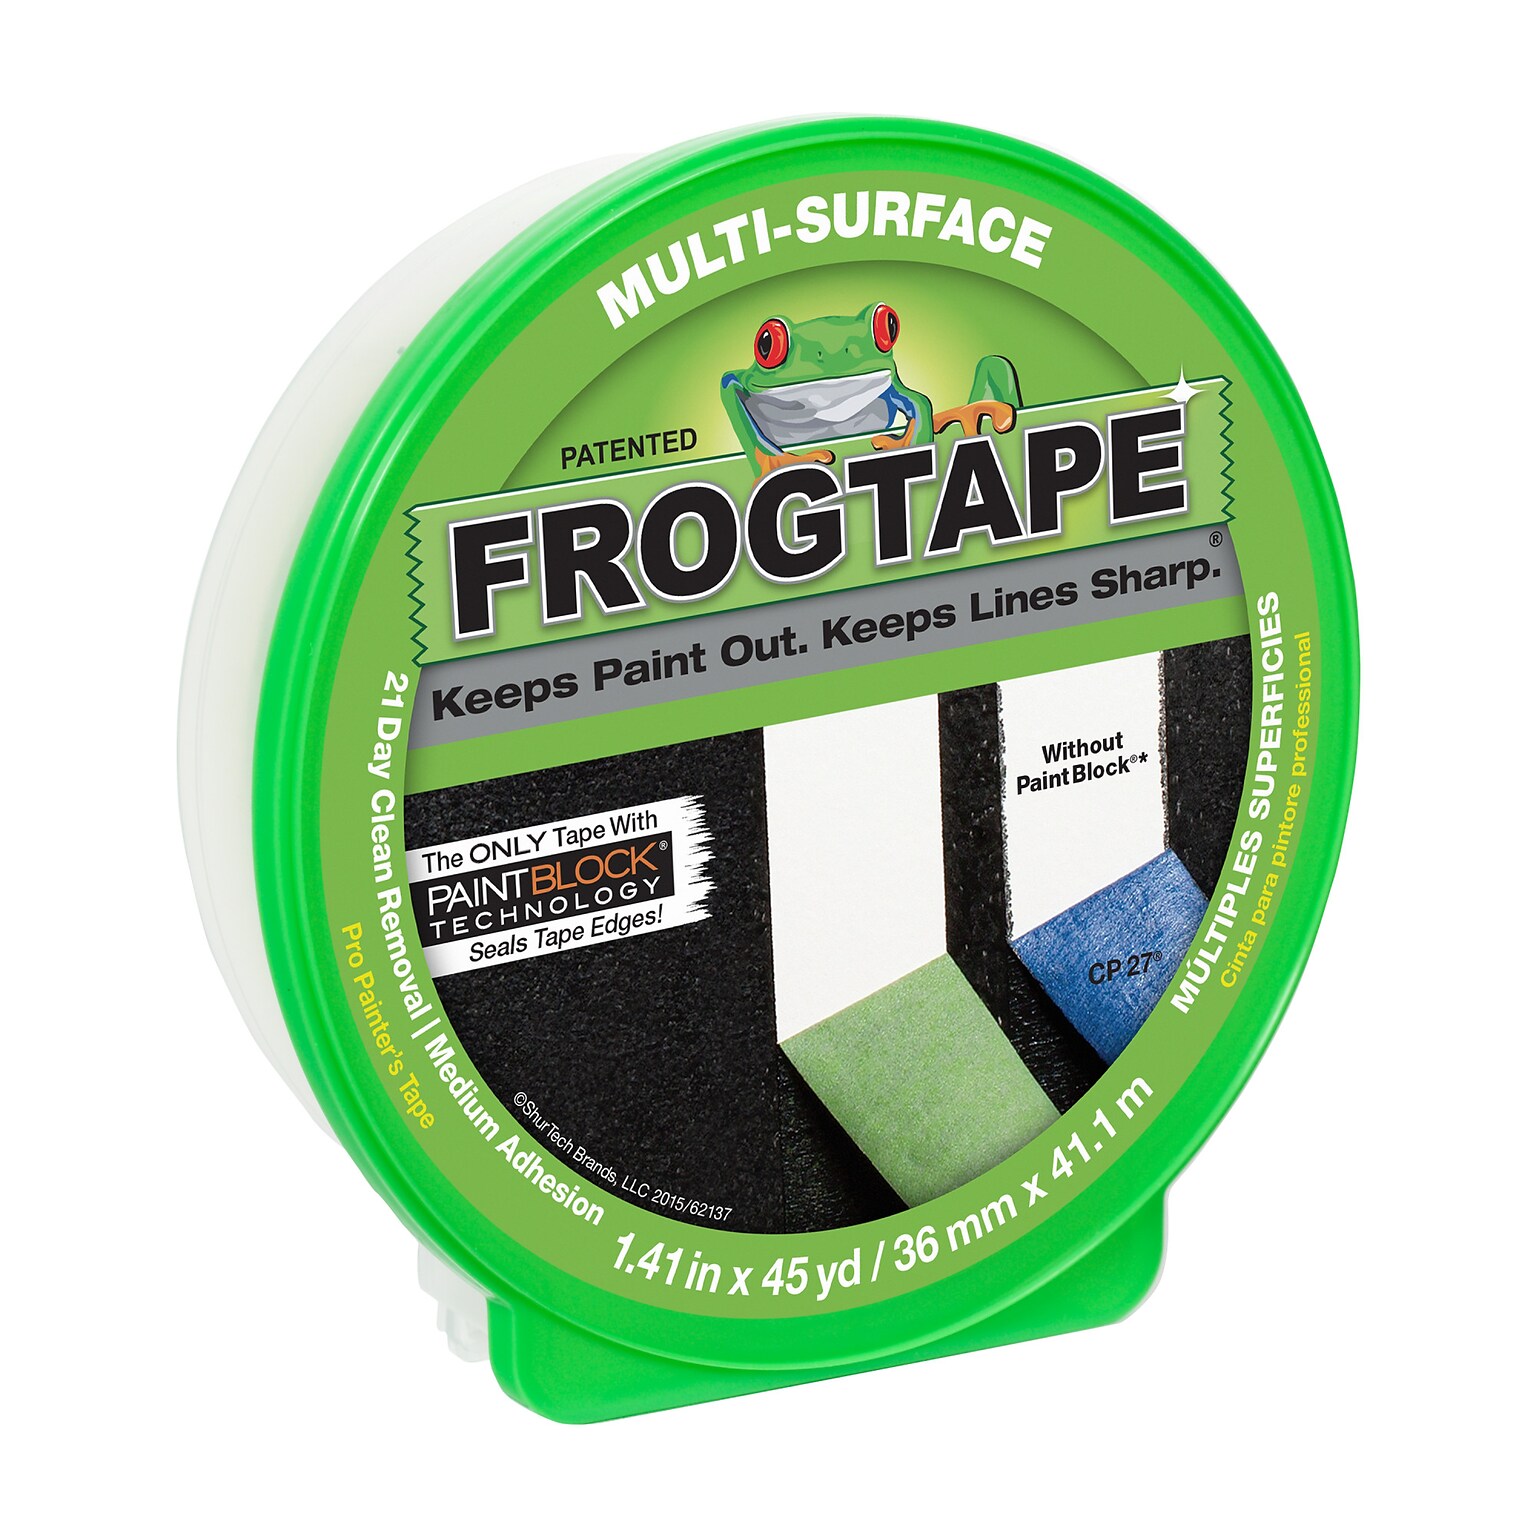 FrogTape Multi-Surface Painter Tape, 1.41 x 45 yds., Green (1396747)